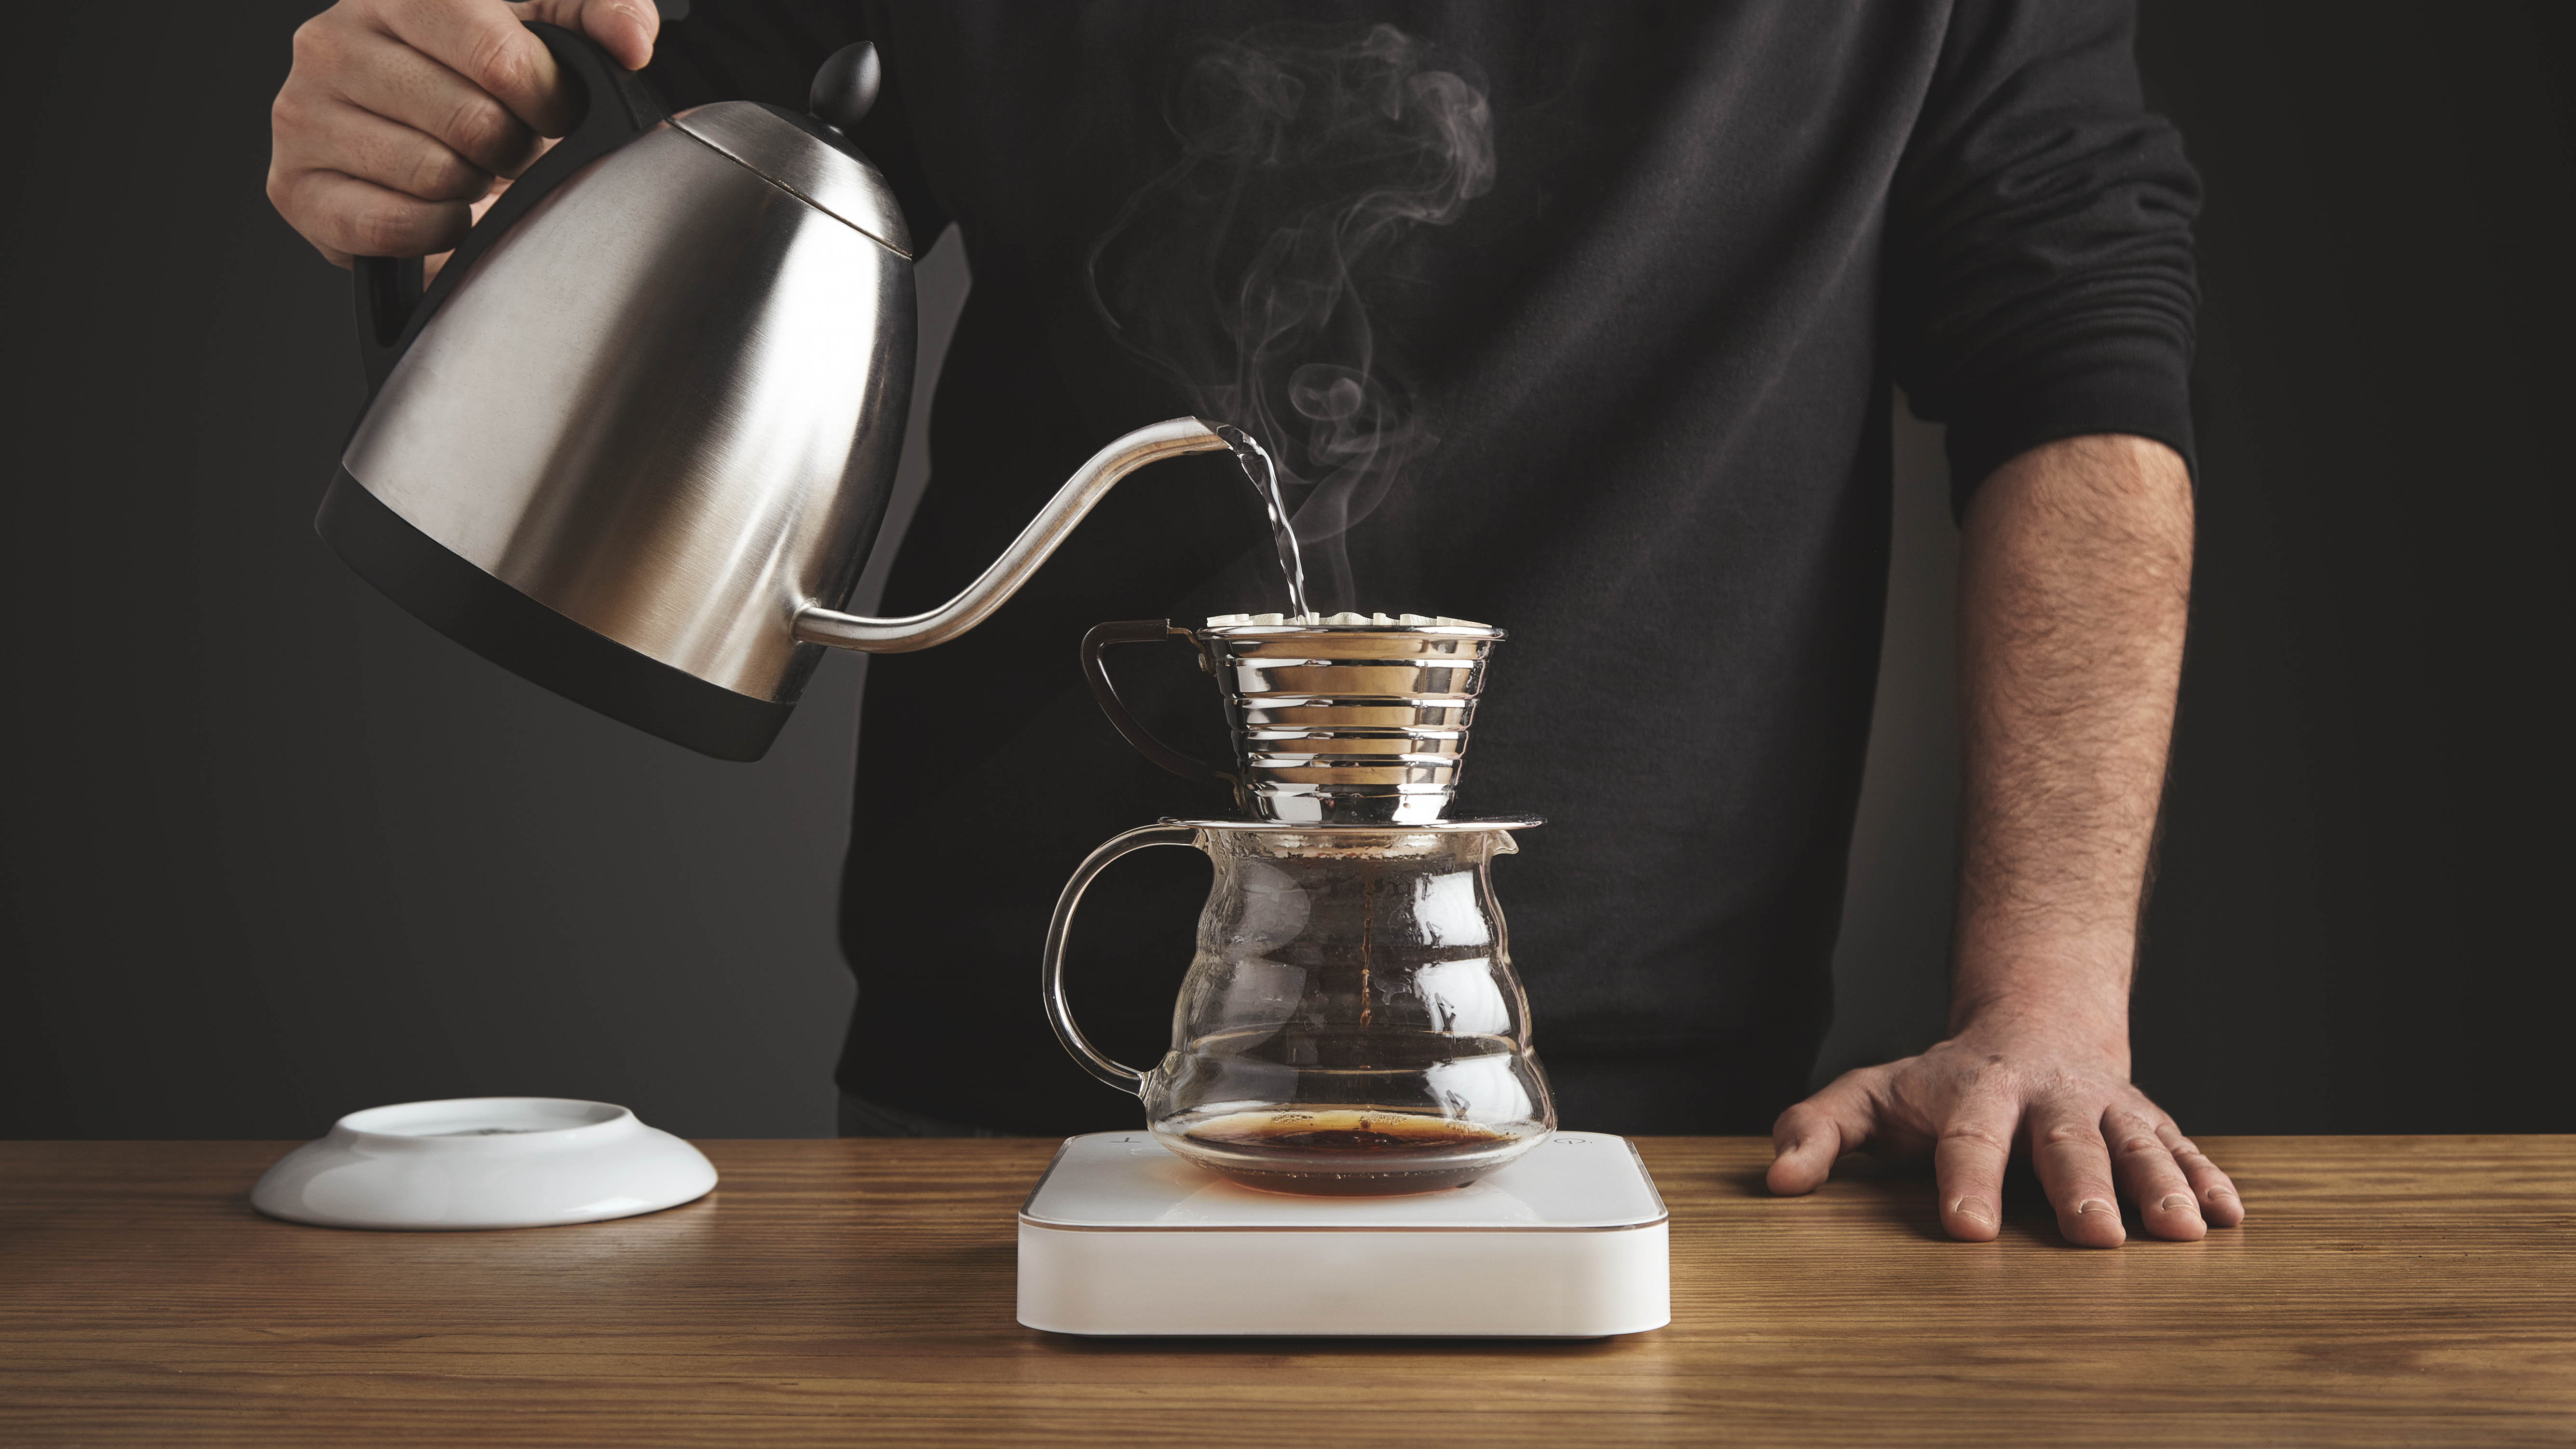 Manual pour-over coffee